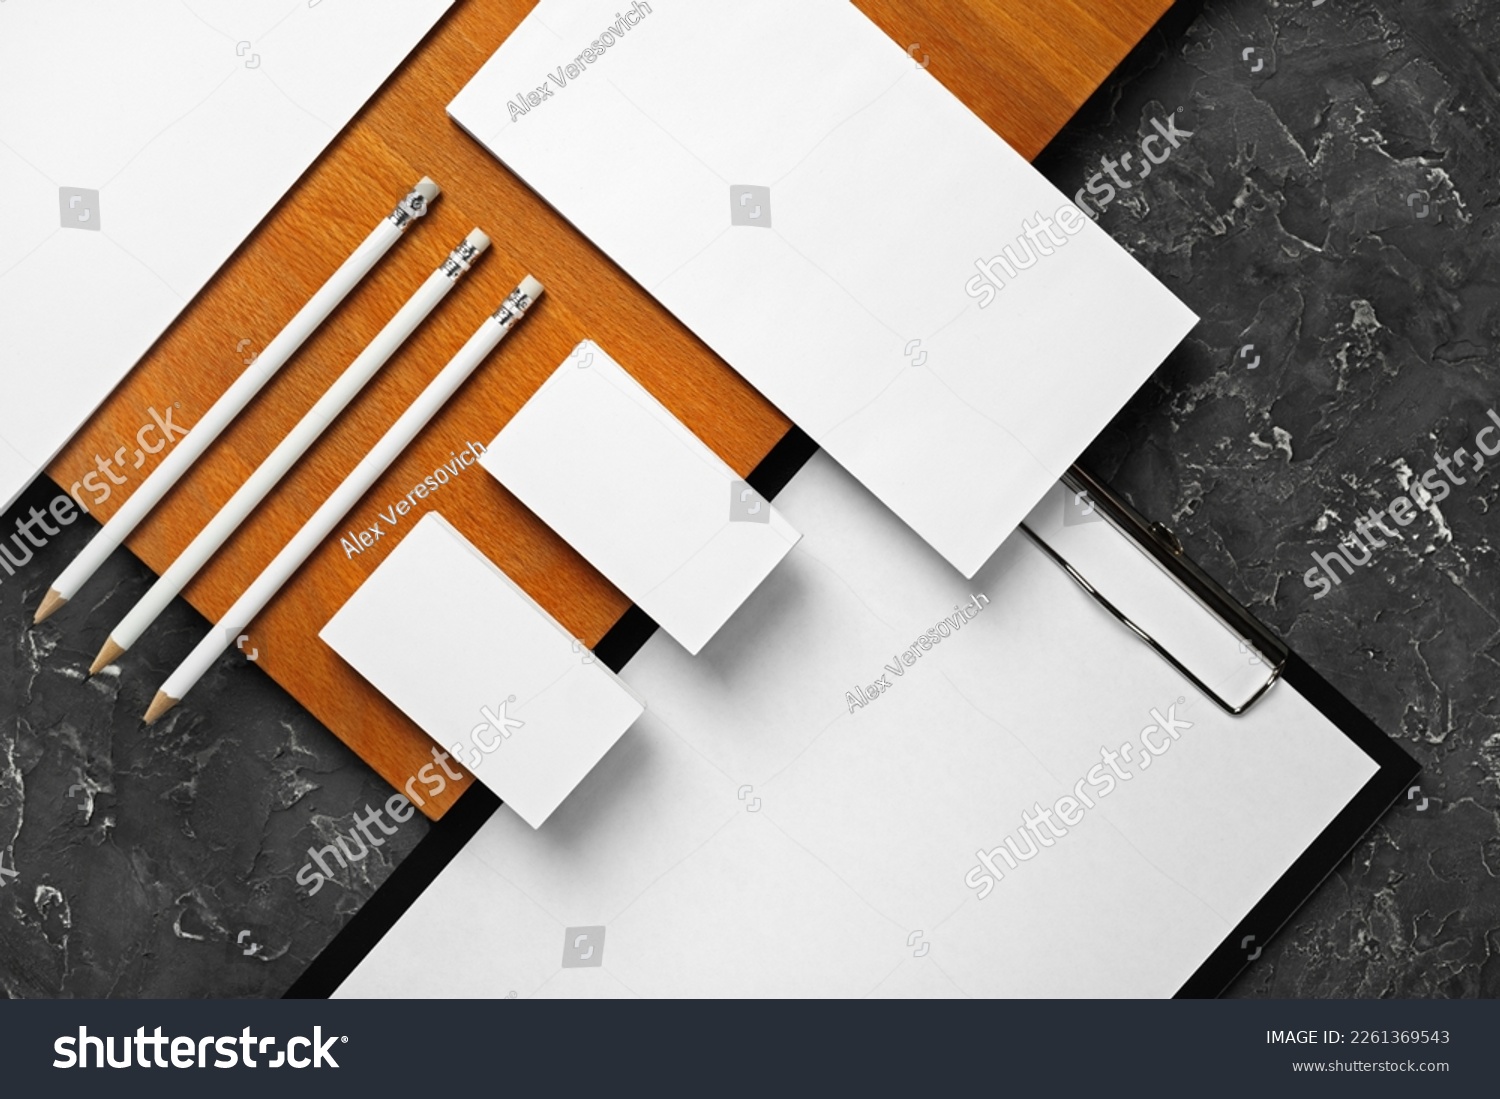 Blank corporate identity template. Photo of blank stationery set. Mockup for design presentations and portfolios. Flat lay. #2261369543